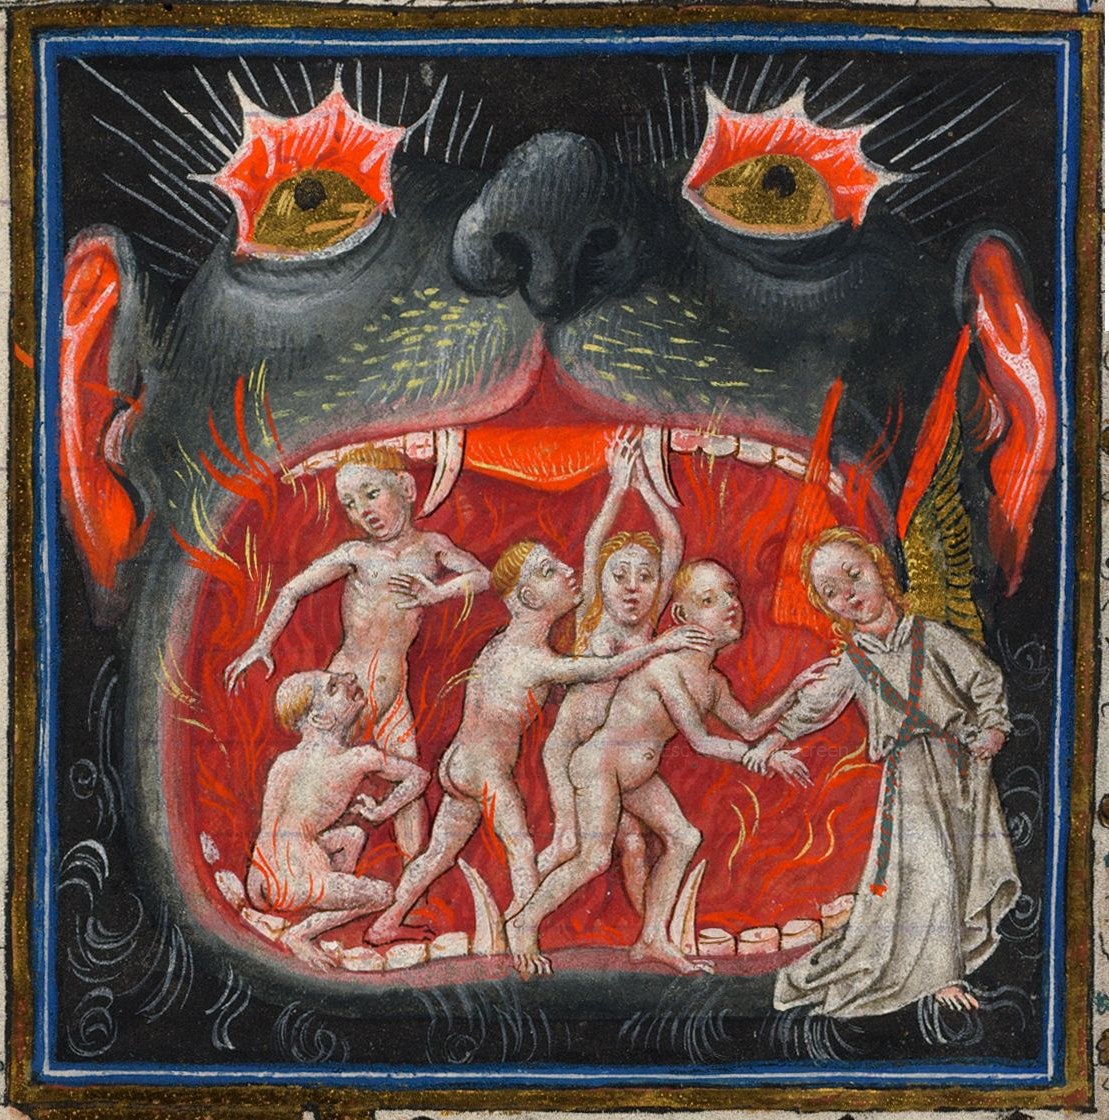 http://upload.wikimedia.org/wikipedia/commons/0/0a/Hellmouth.jpg